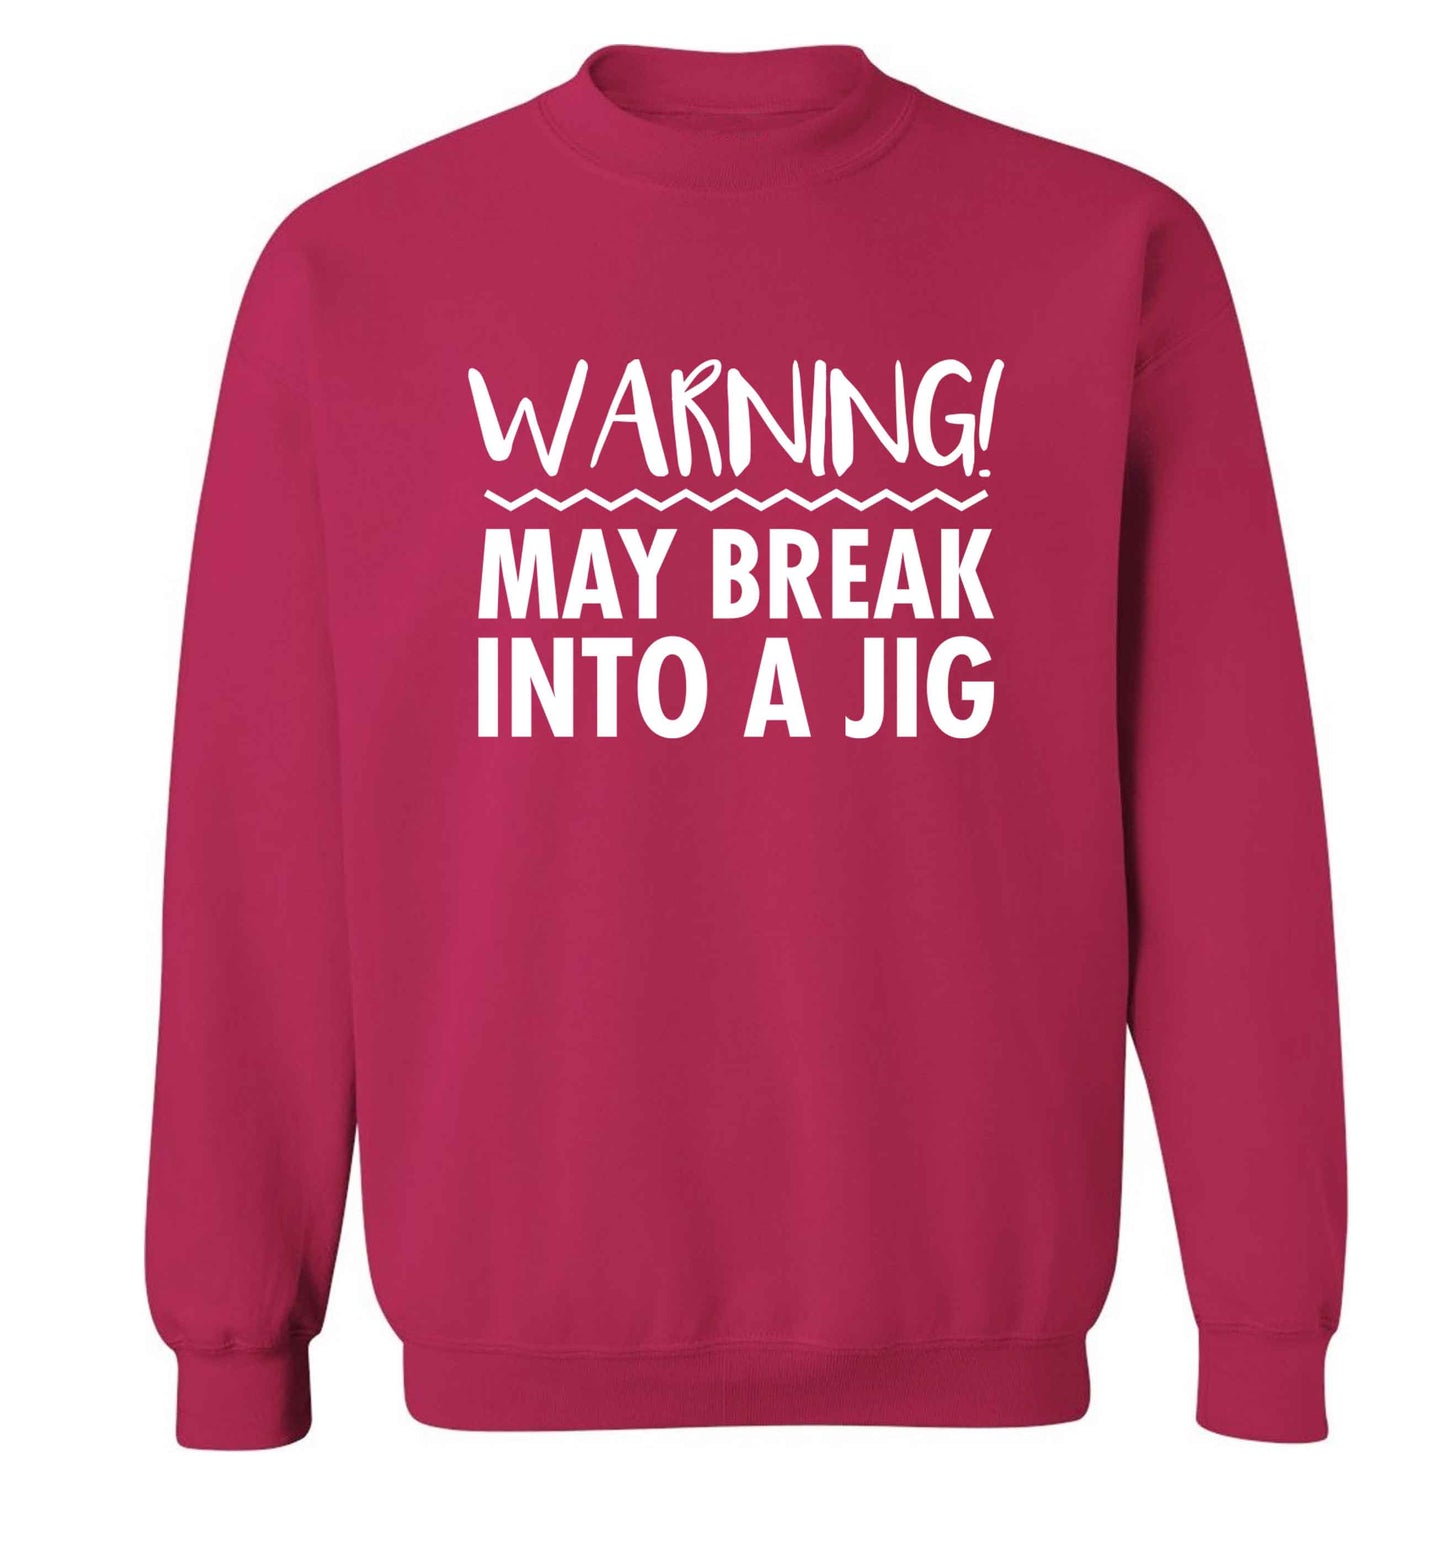 Warning may break into a jig adult's unisex pink sweater 2XL